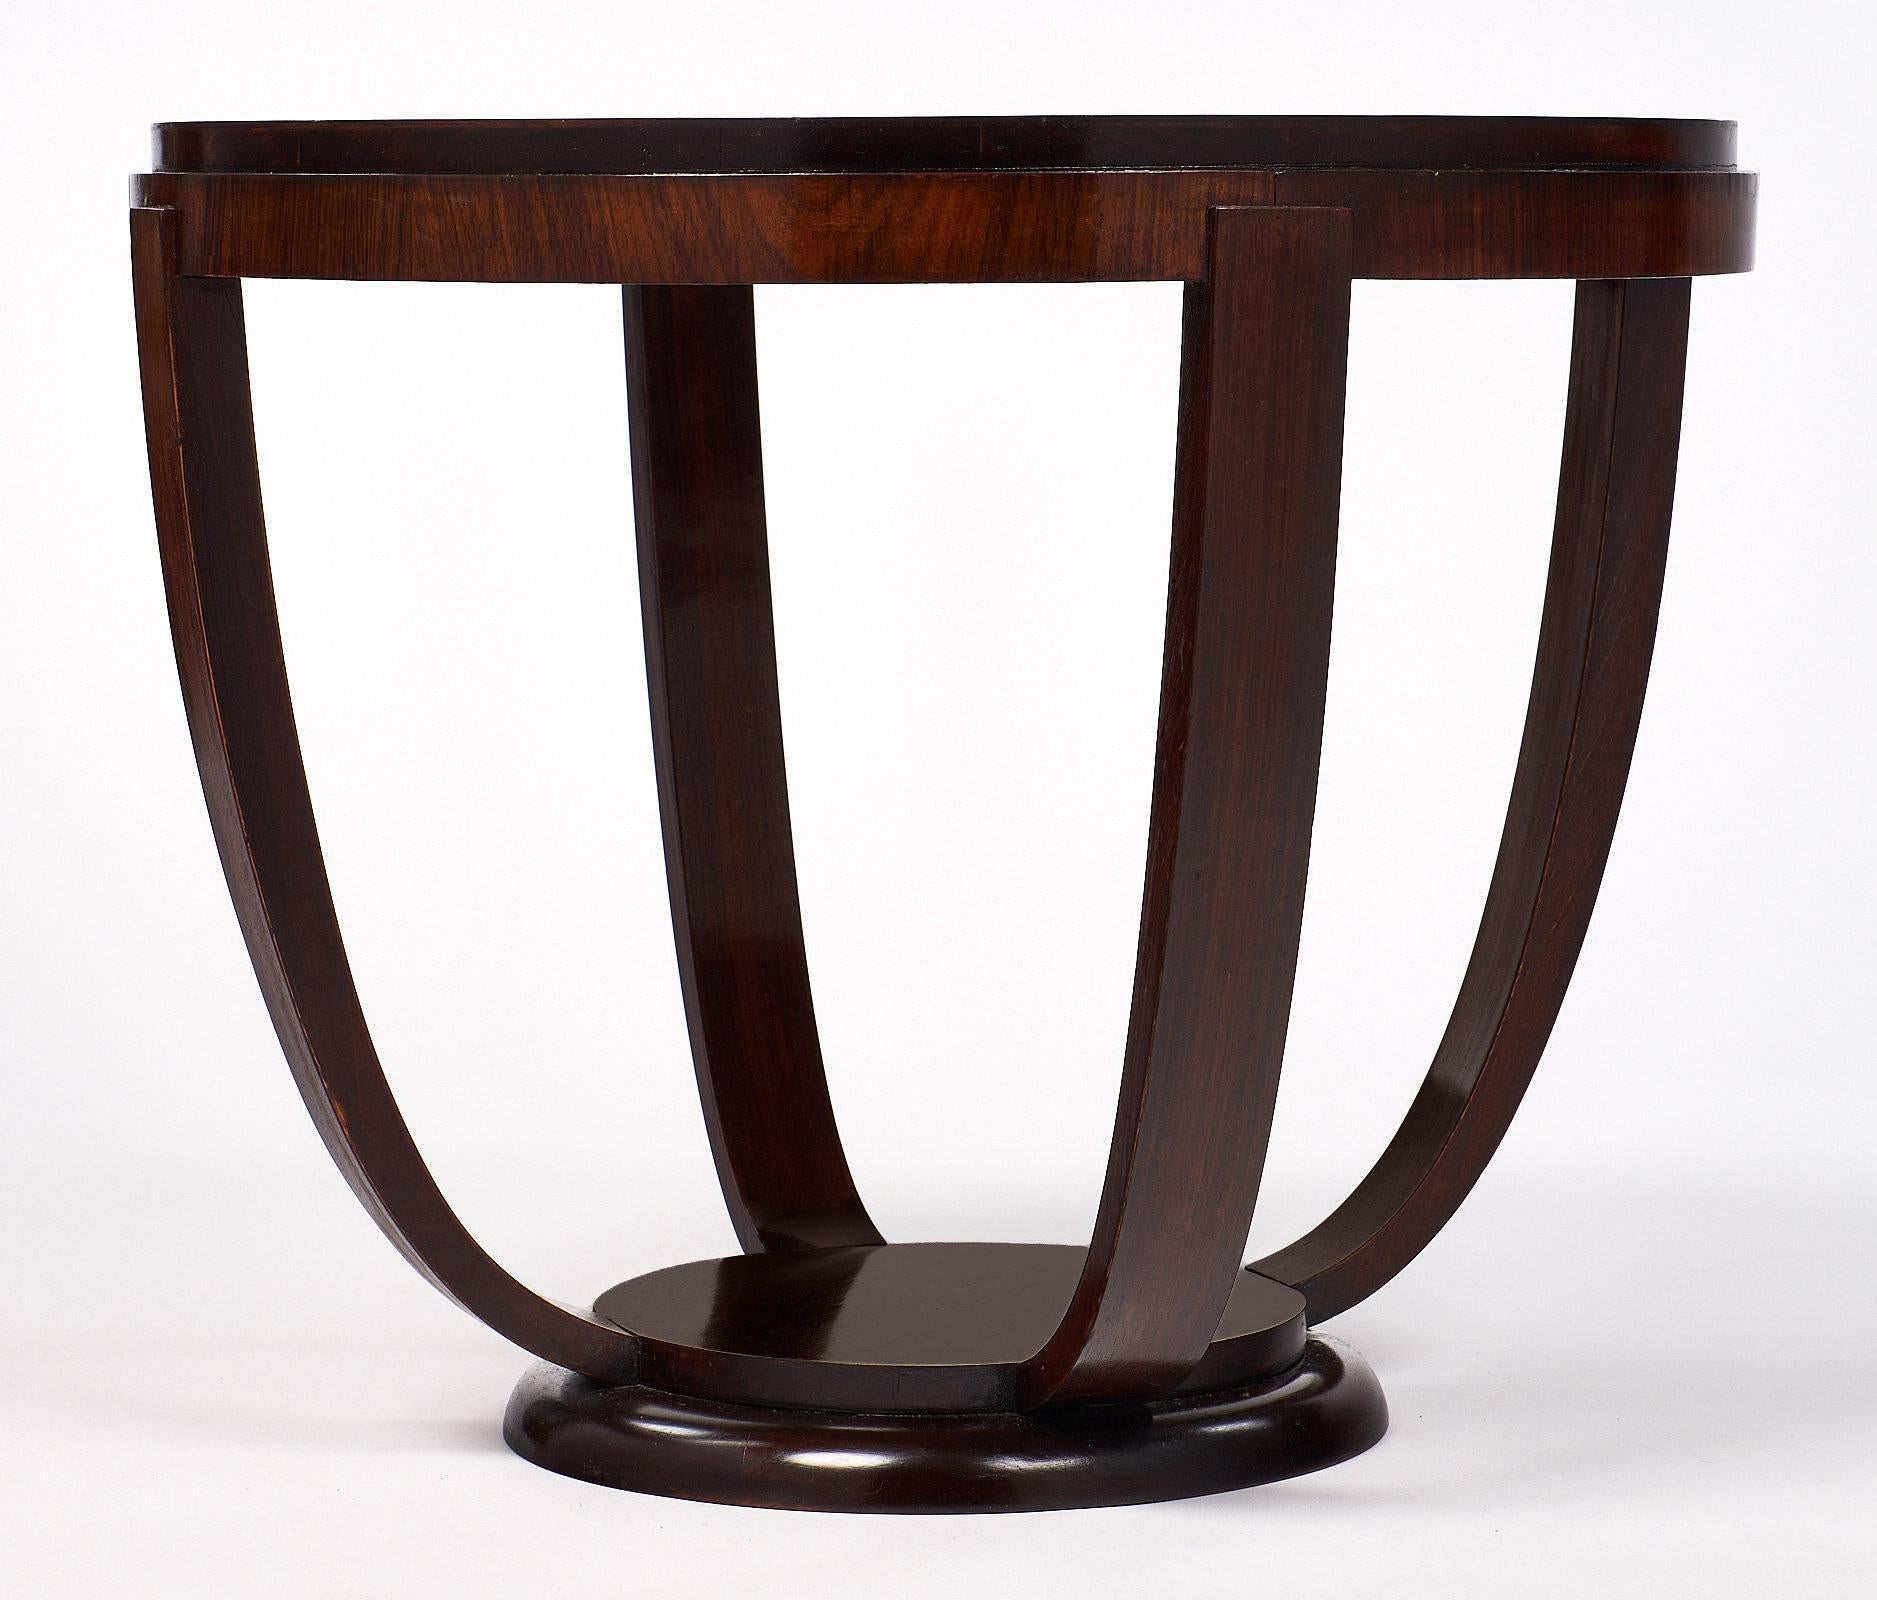 This mahogany gueridon has the simple, curved lines and beautiful wood that is seen in Art Deco period pieces. The table is a great size for beside an armchair or sofa. The circular top is supported by four legs that curve down to a small circular